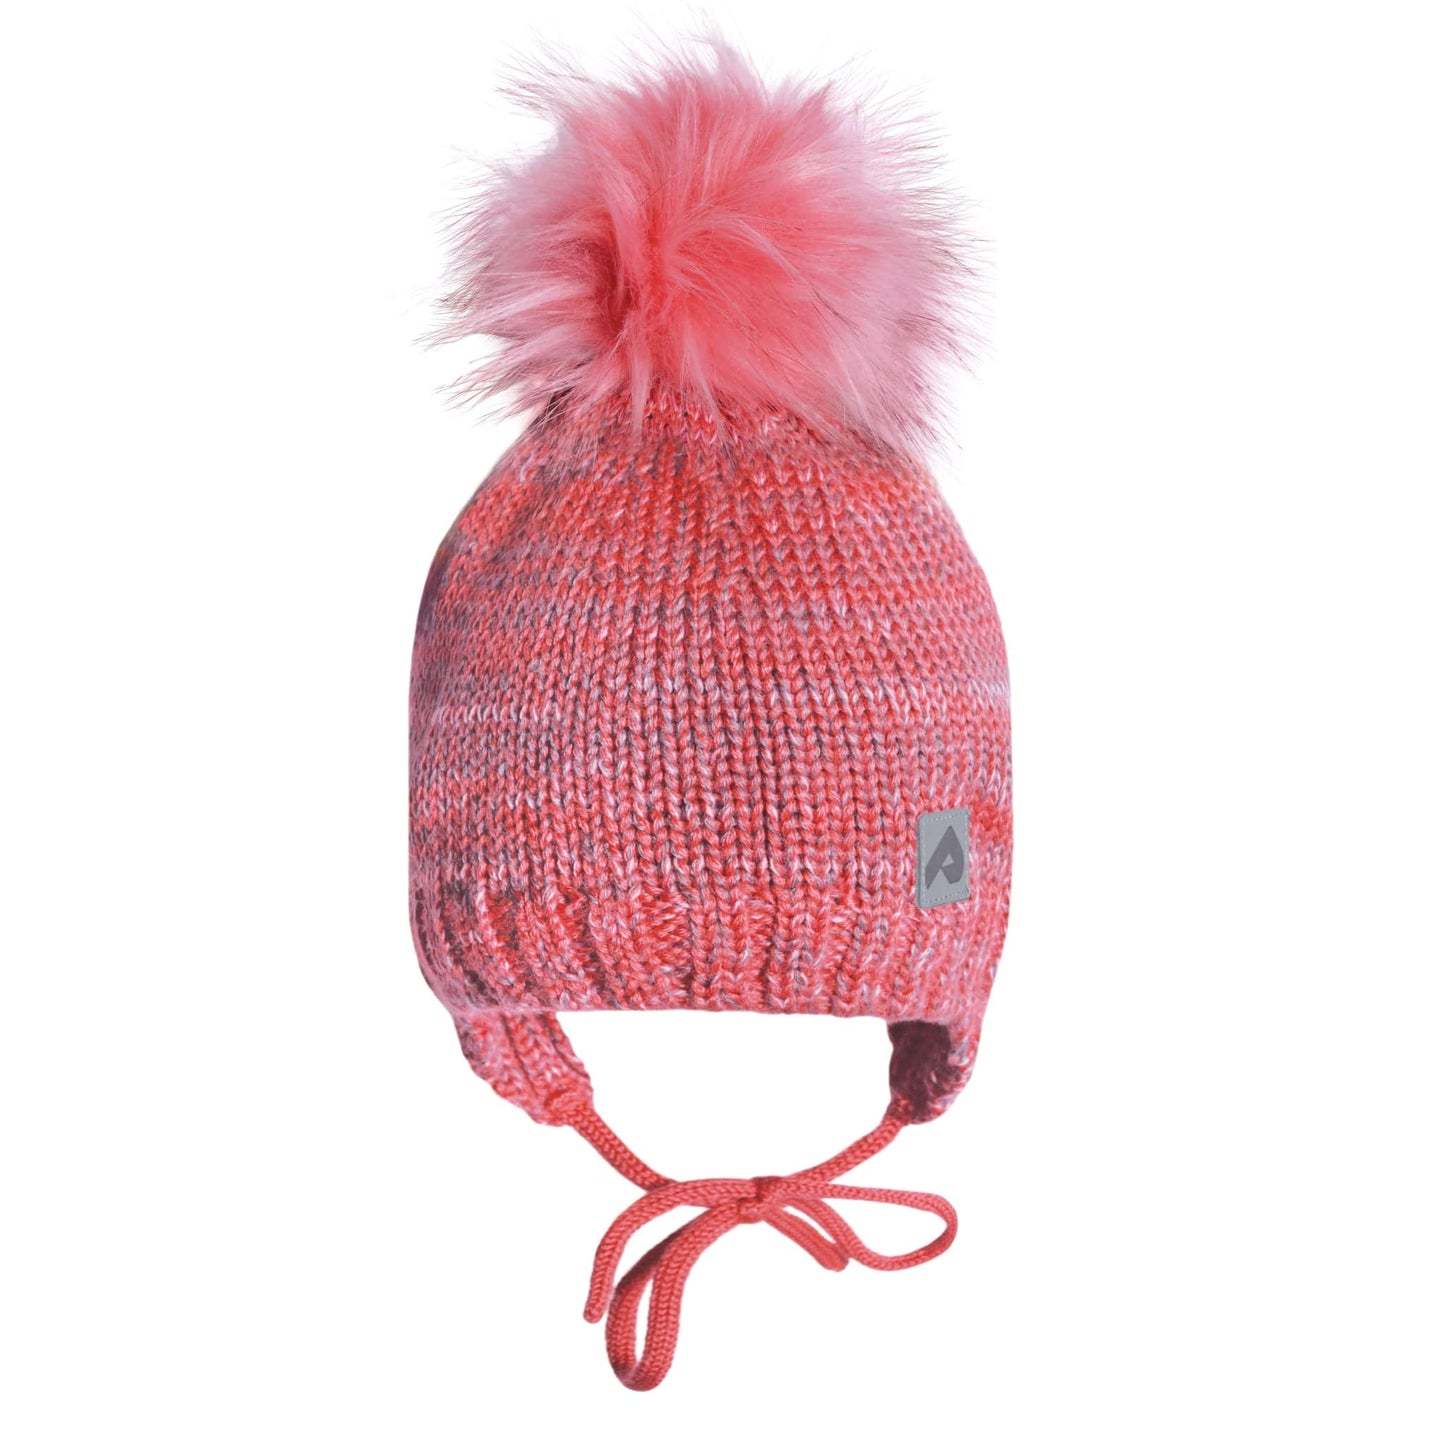 Acrylic hat with fleece lining and ears - Multi Pink